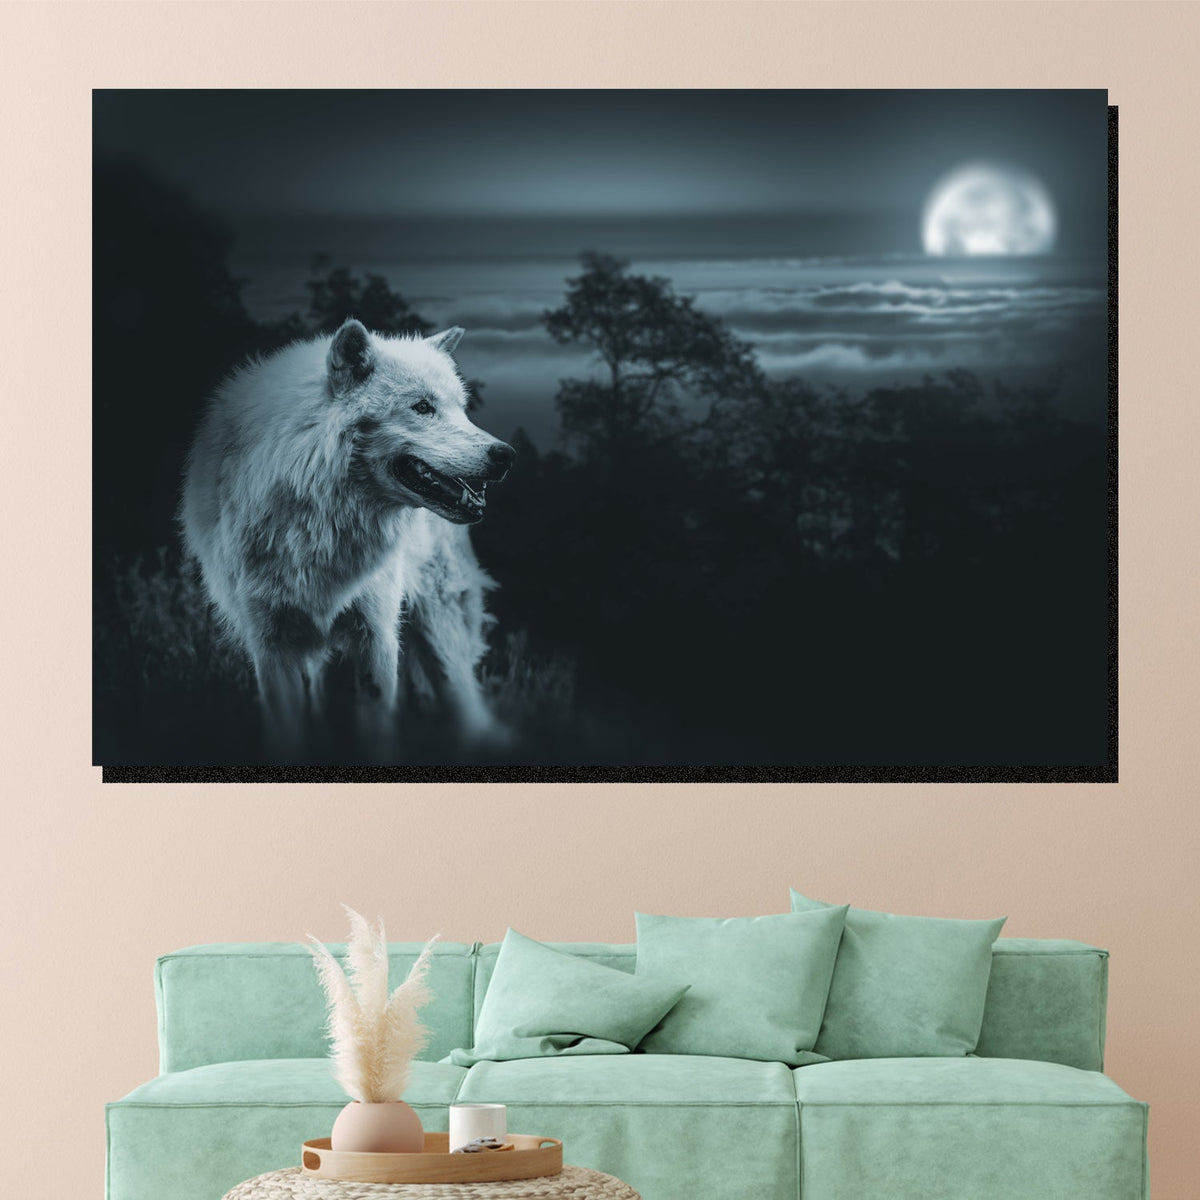 https://cdn.shopify.com/s/files/1/0387/9986/8044/products/MidnightWolfCanvasArtprintStretched-3.jpg